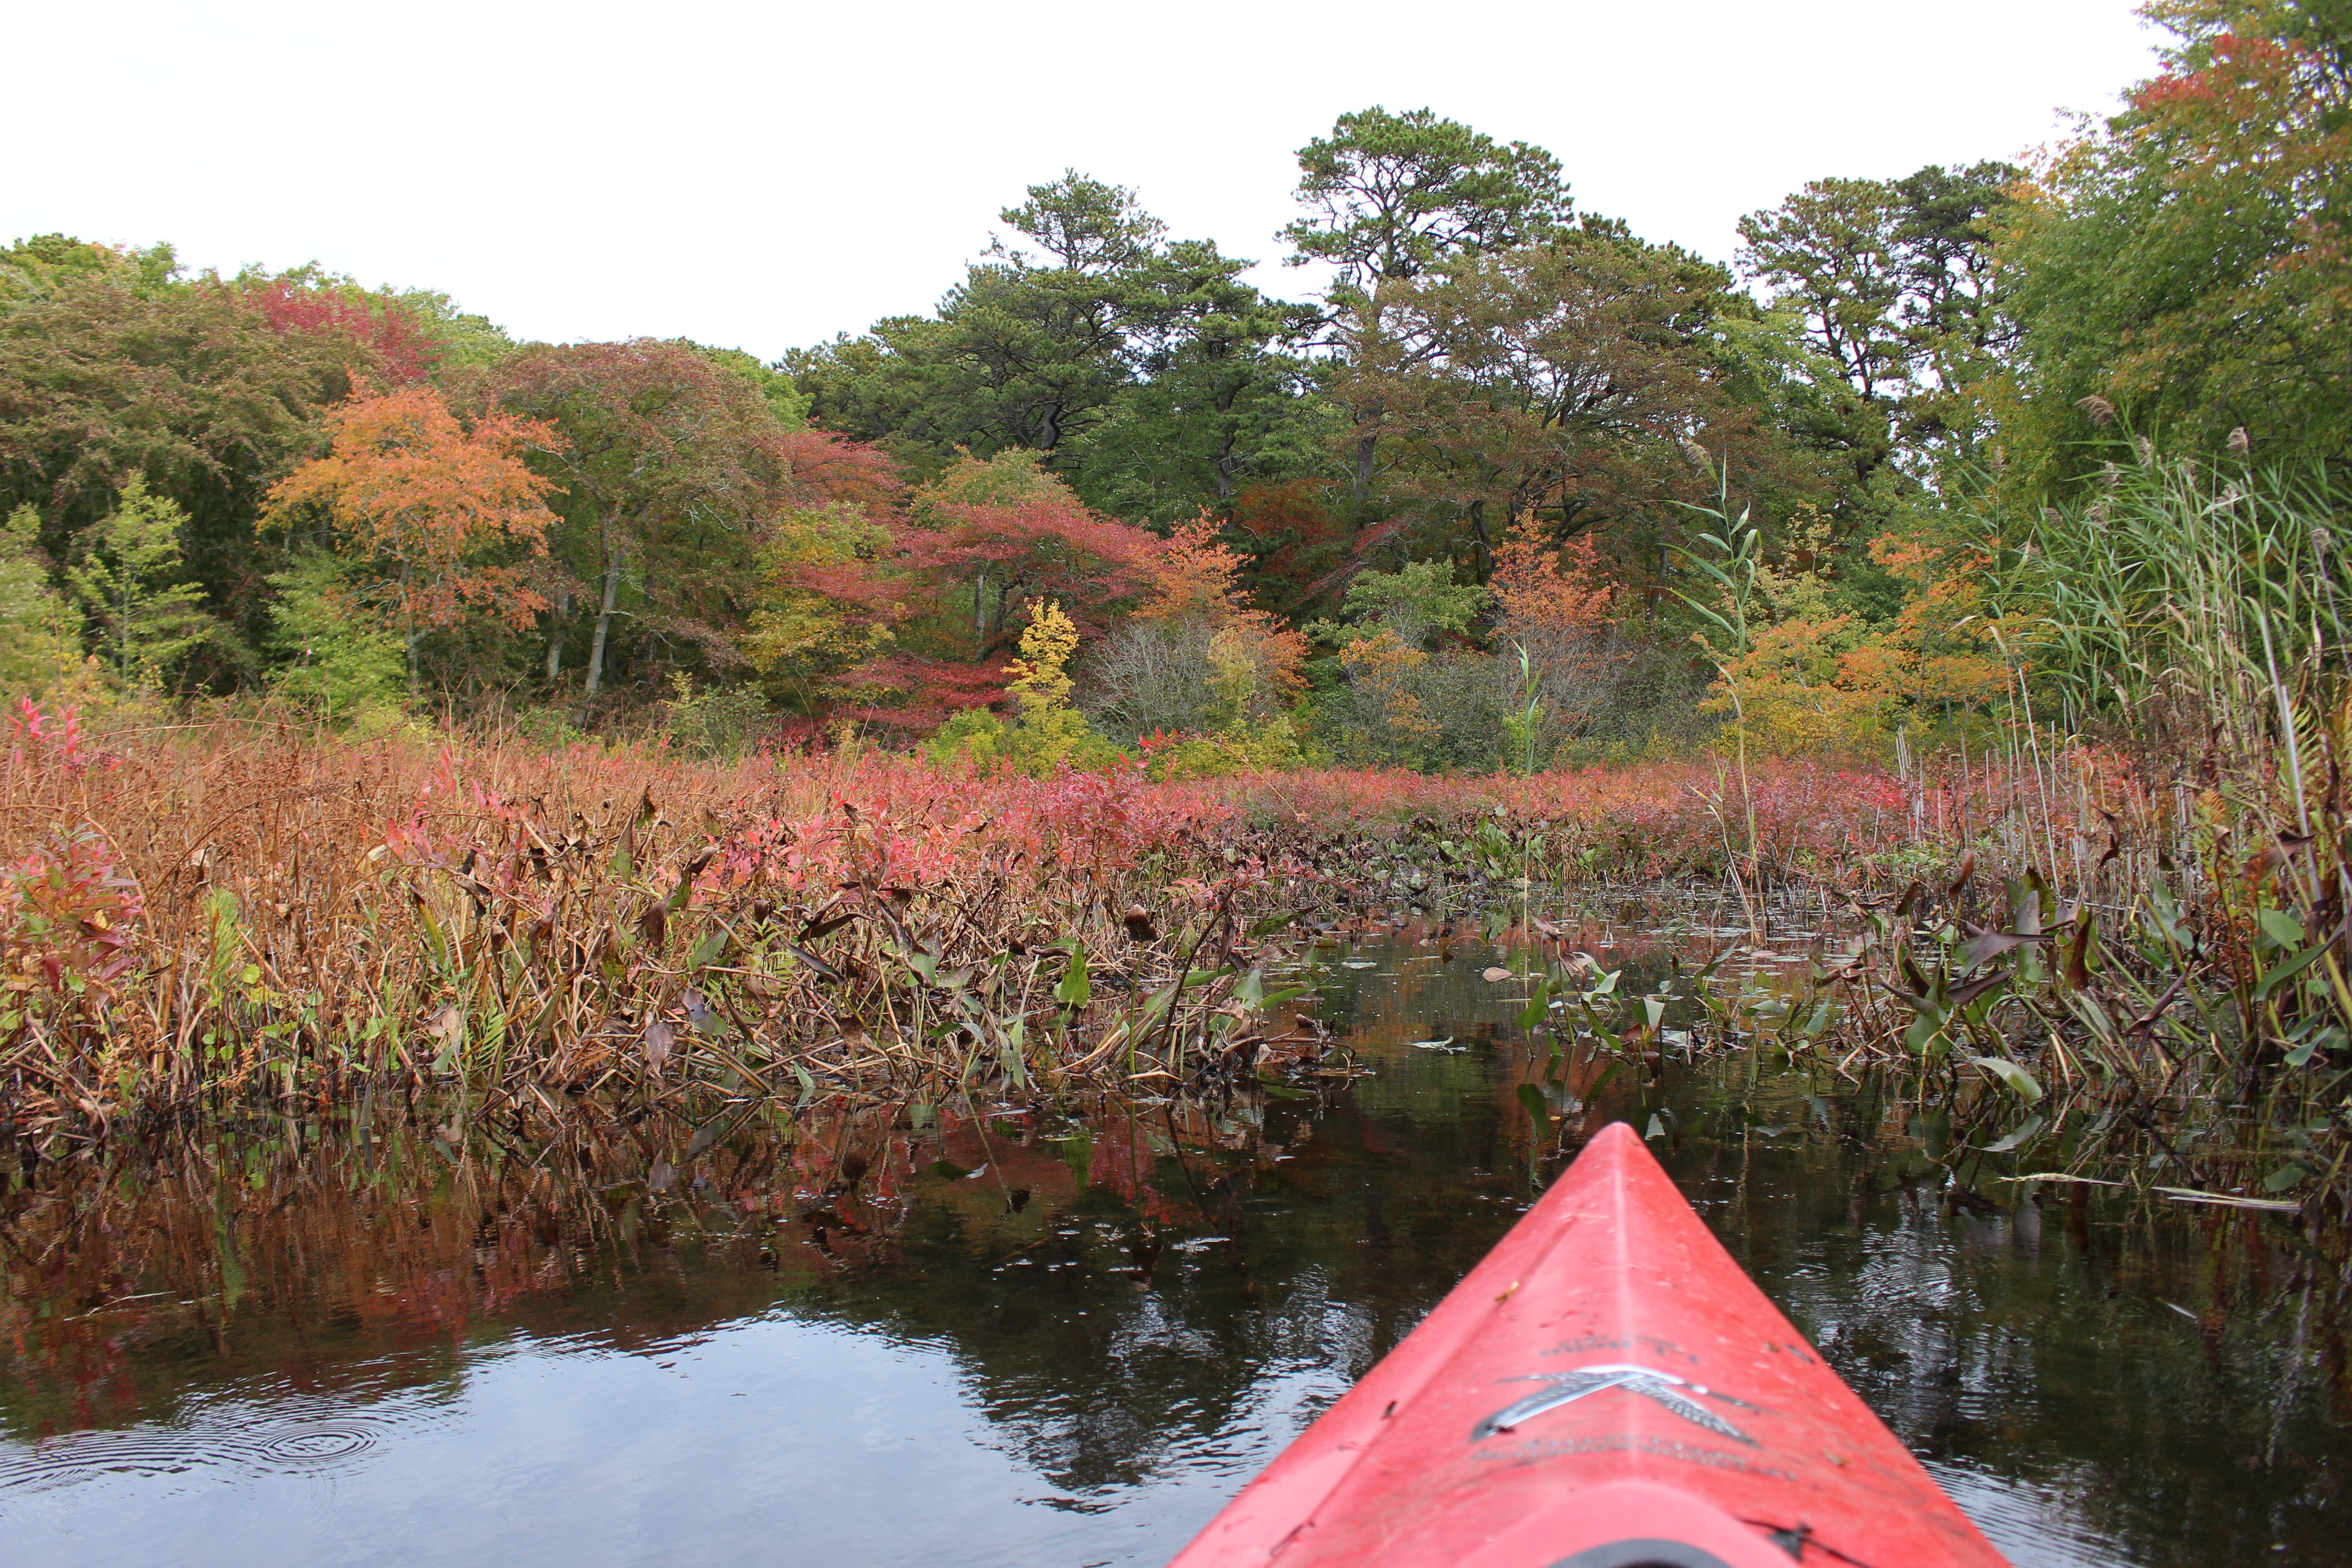 A red kayak floats on a pond facing a forest colored with red and orange leaves.